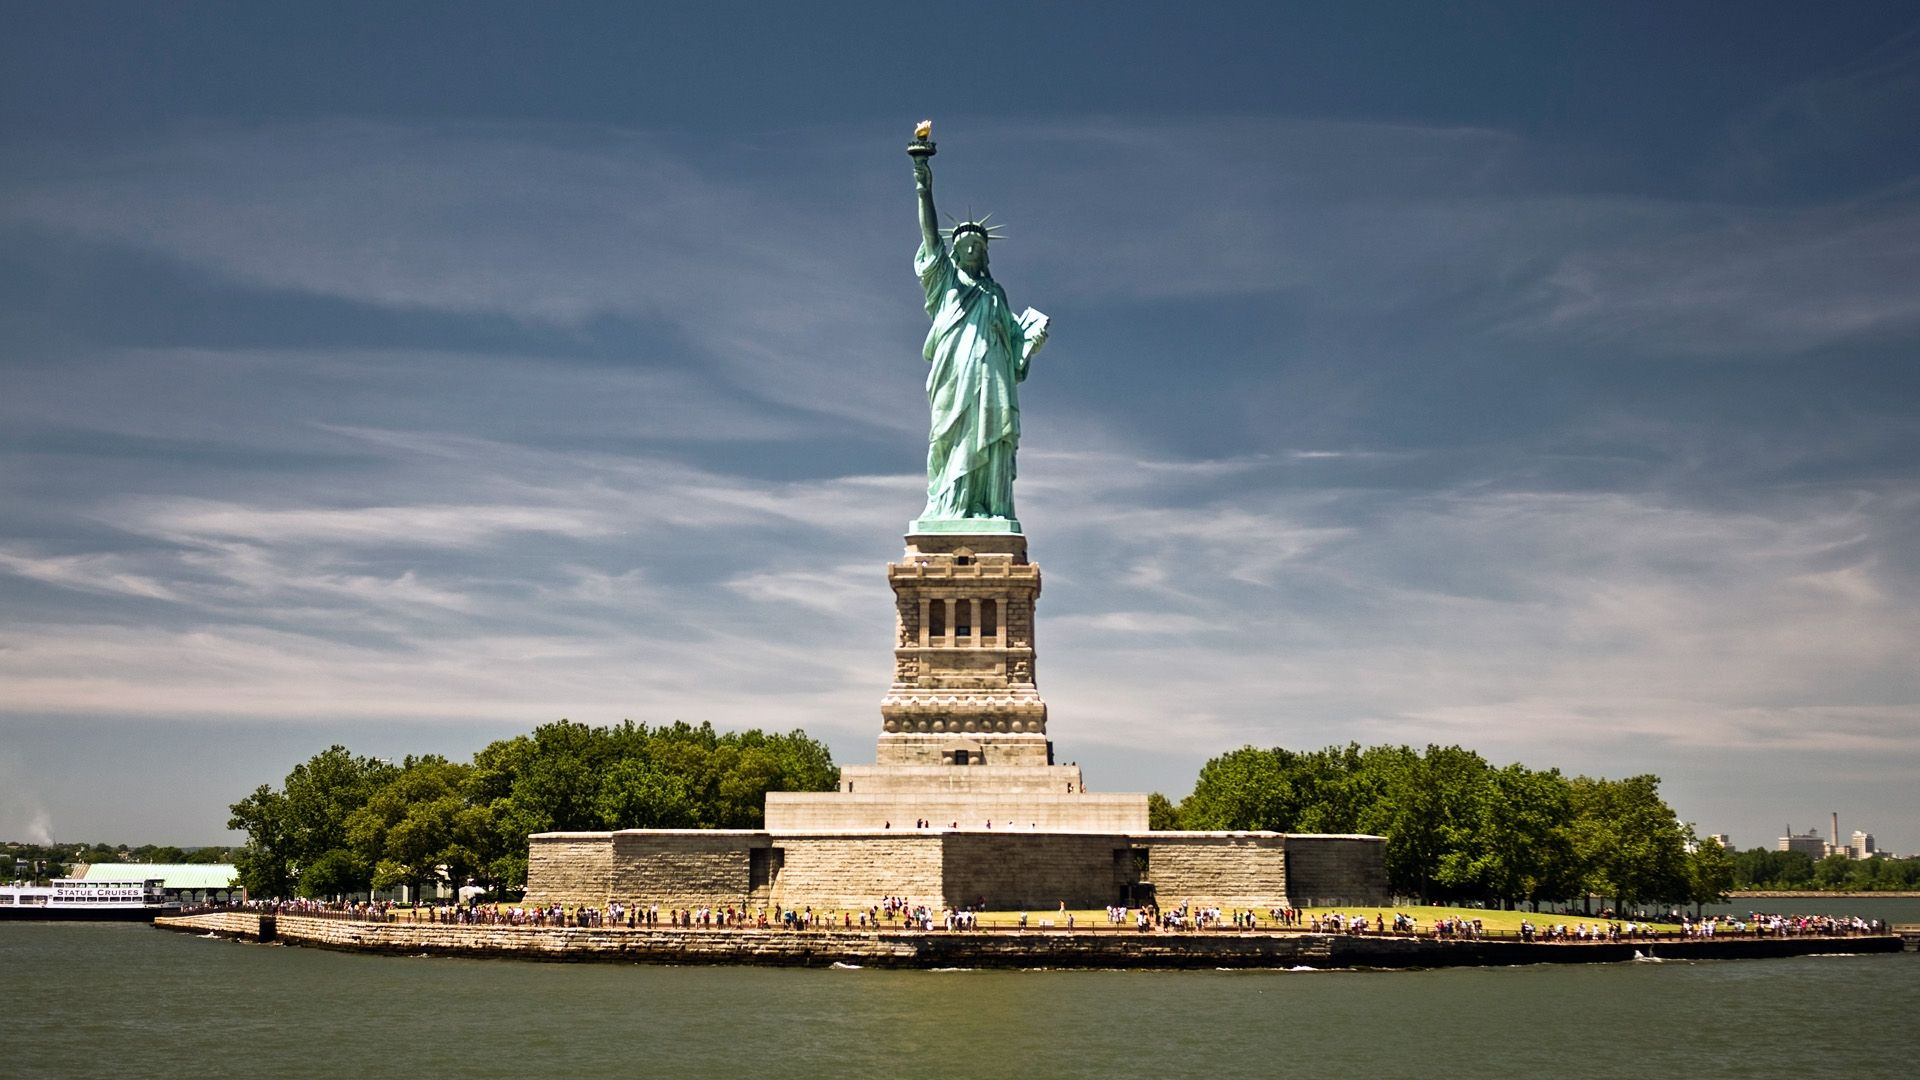 1920x1080 Statue of Liberty [1920 1080] | Statue of liberty, New york attractions, Statue